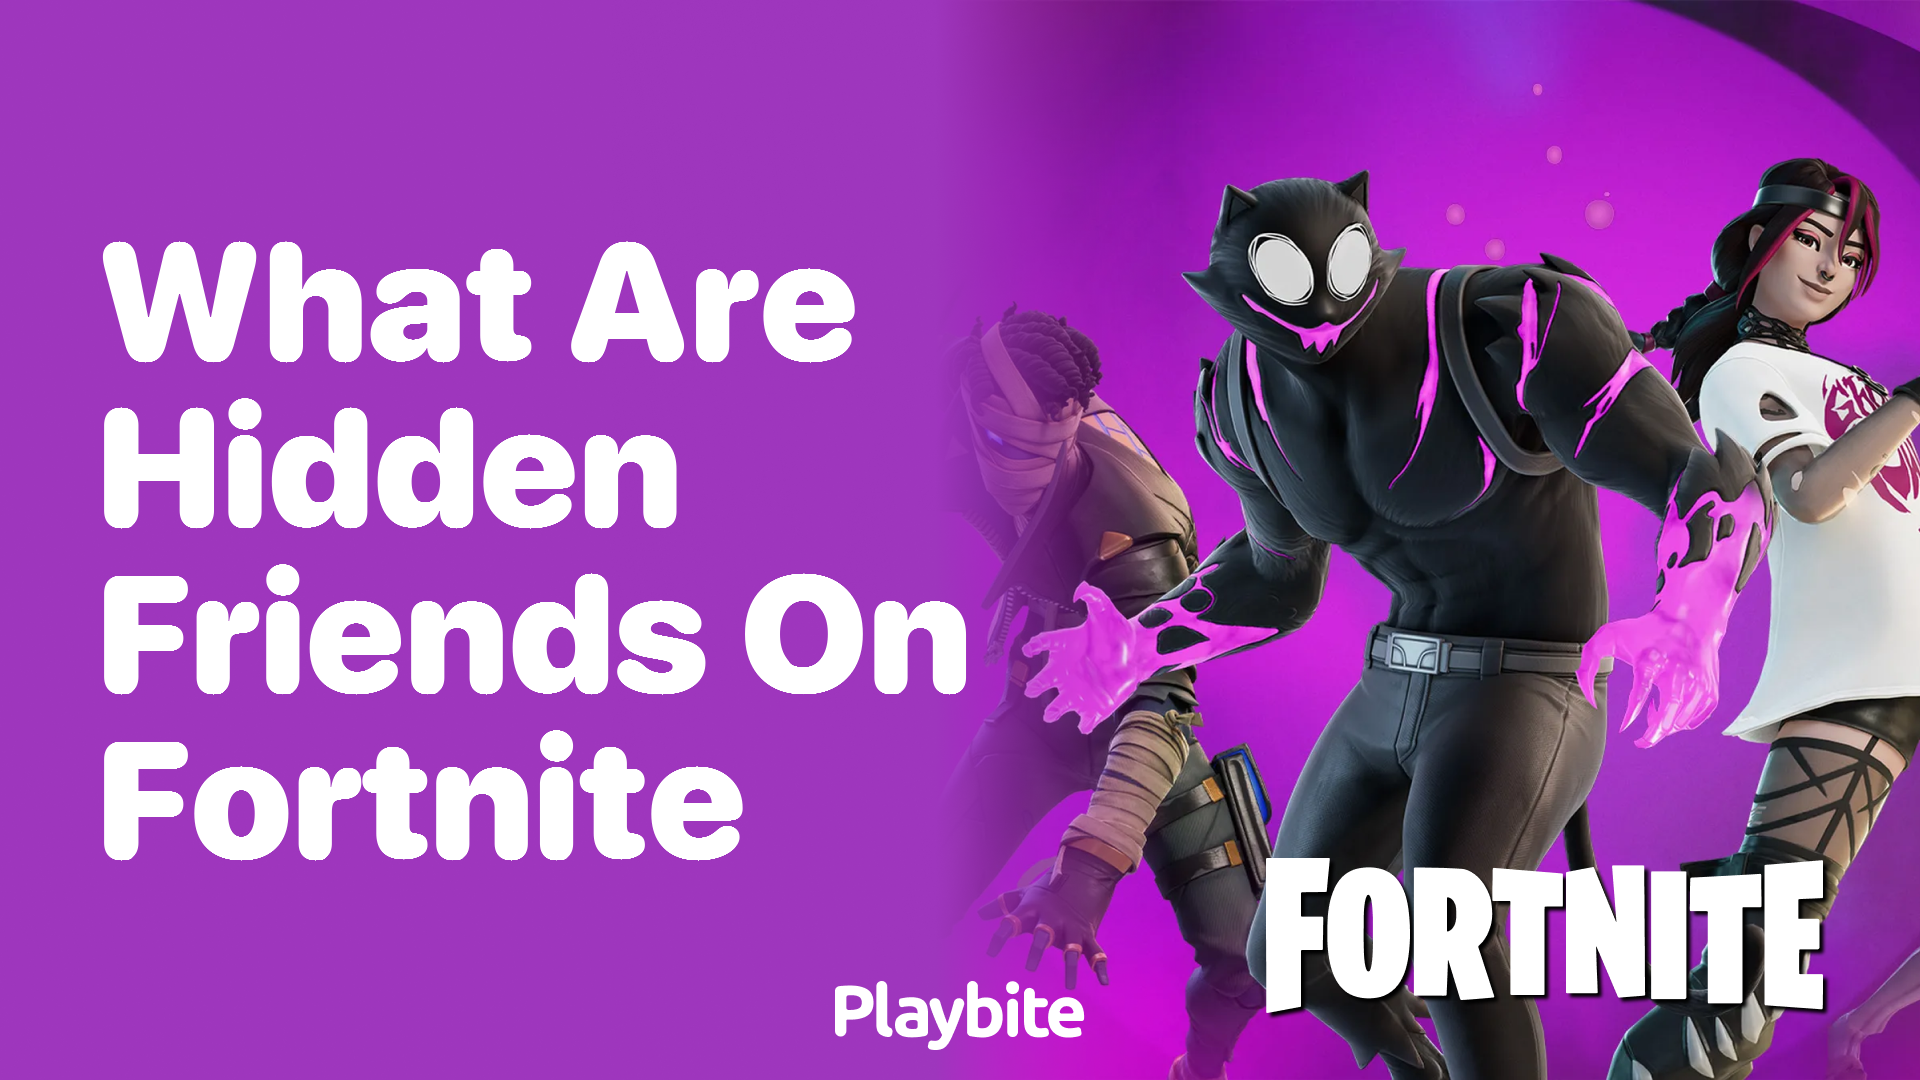 What Are Hidden Friends on Fortnite?